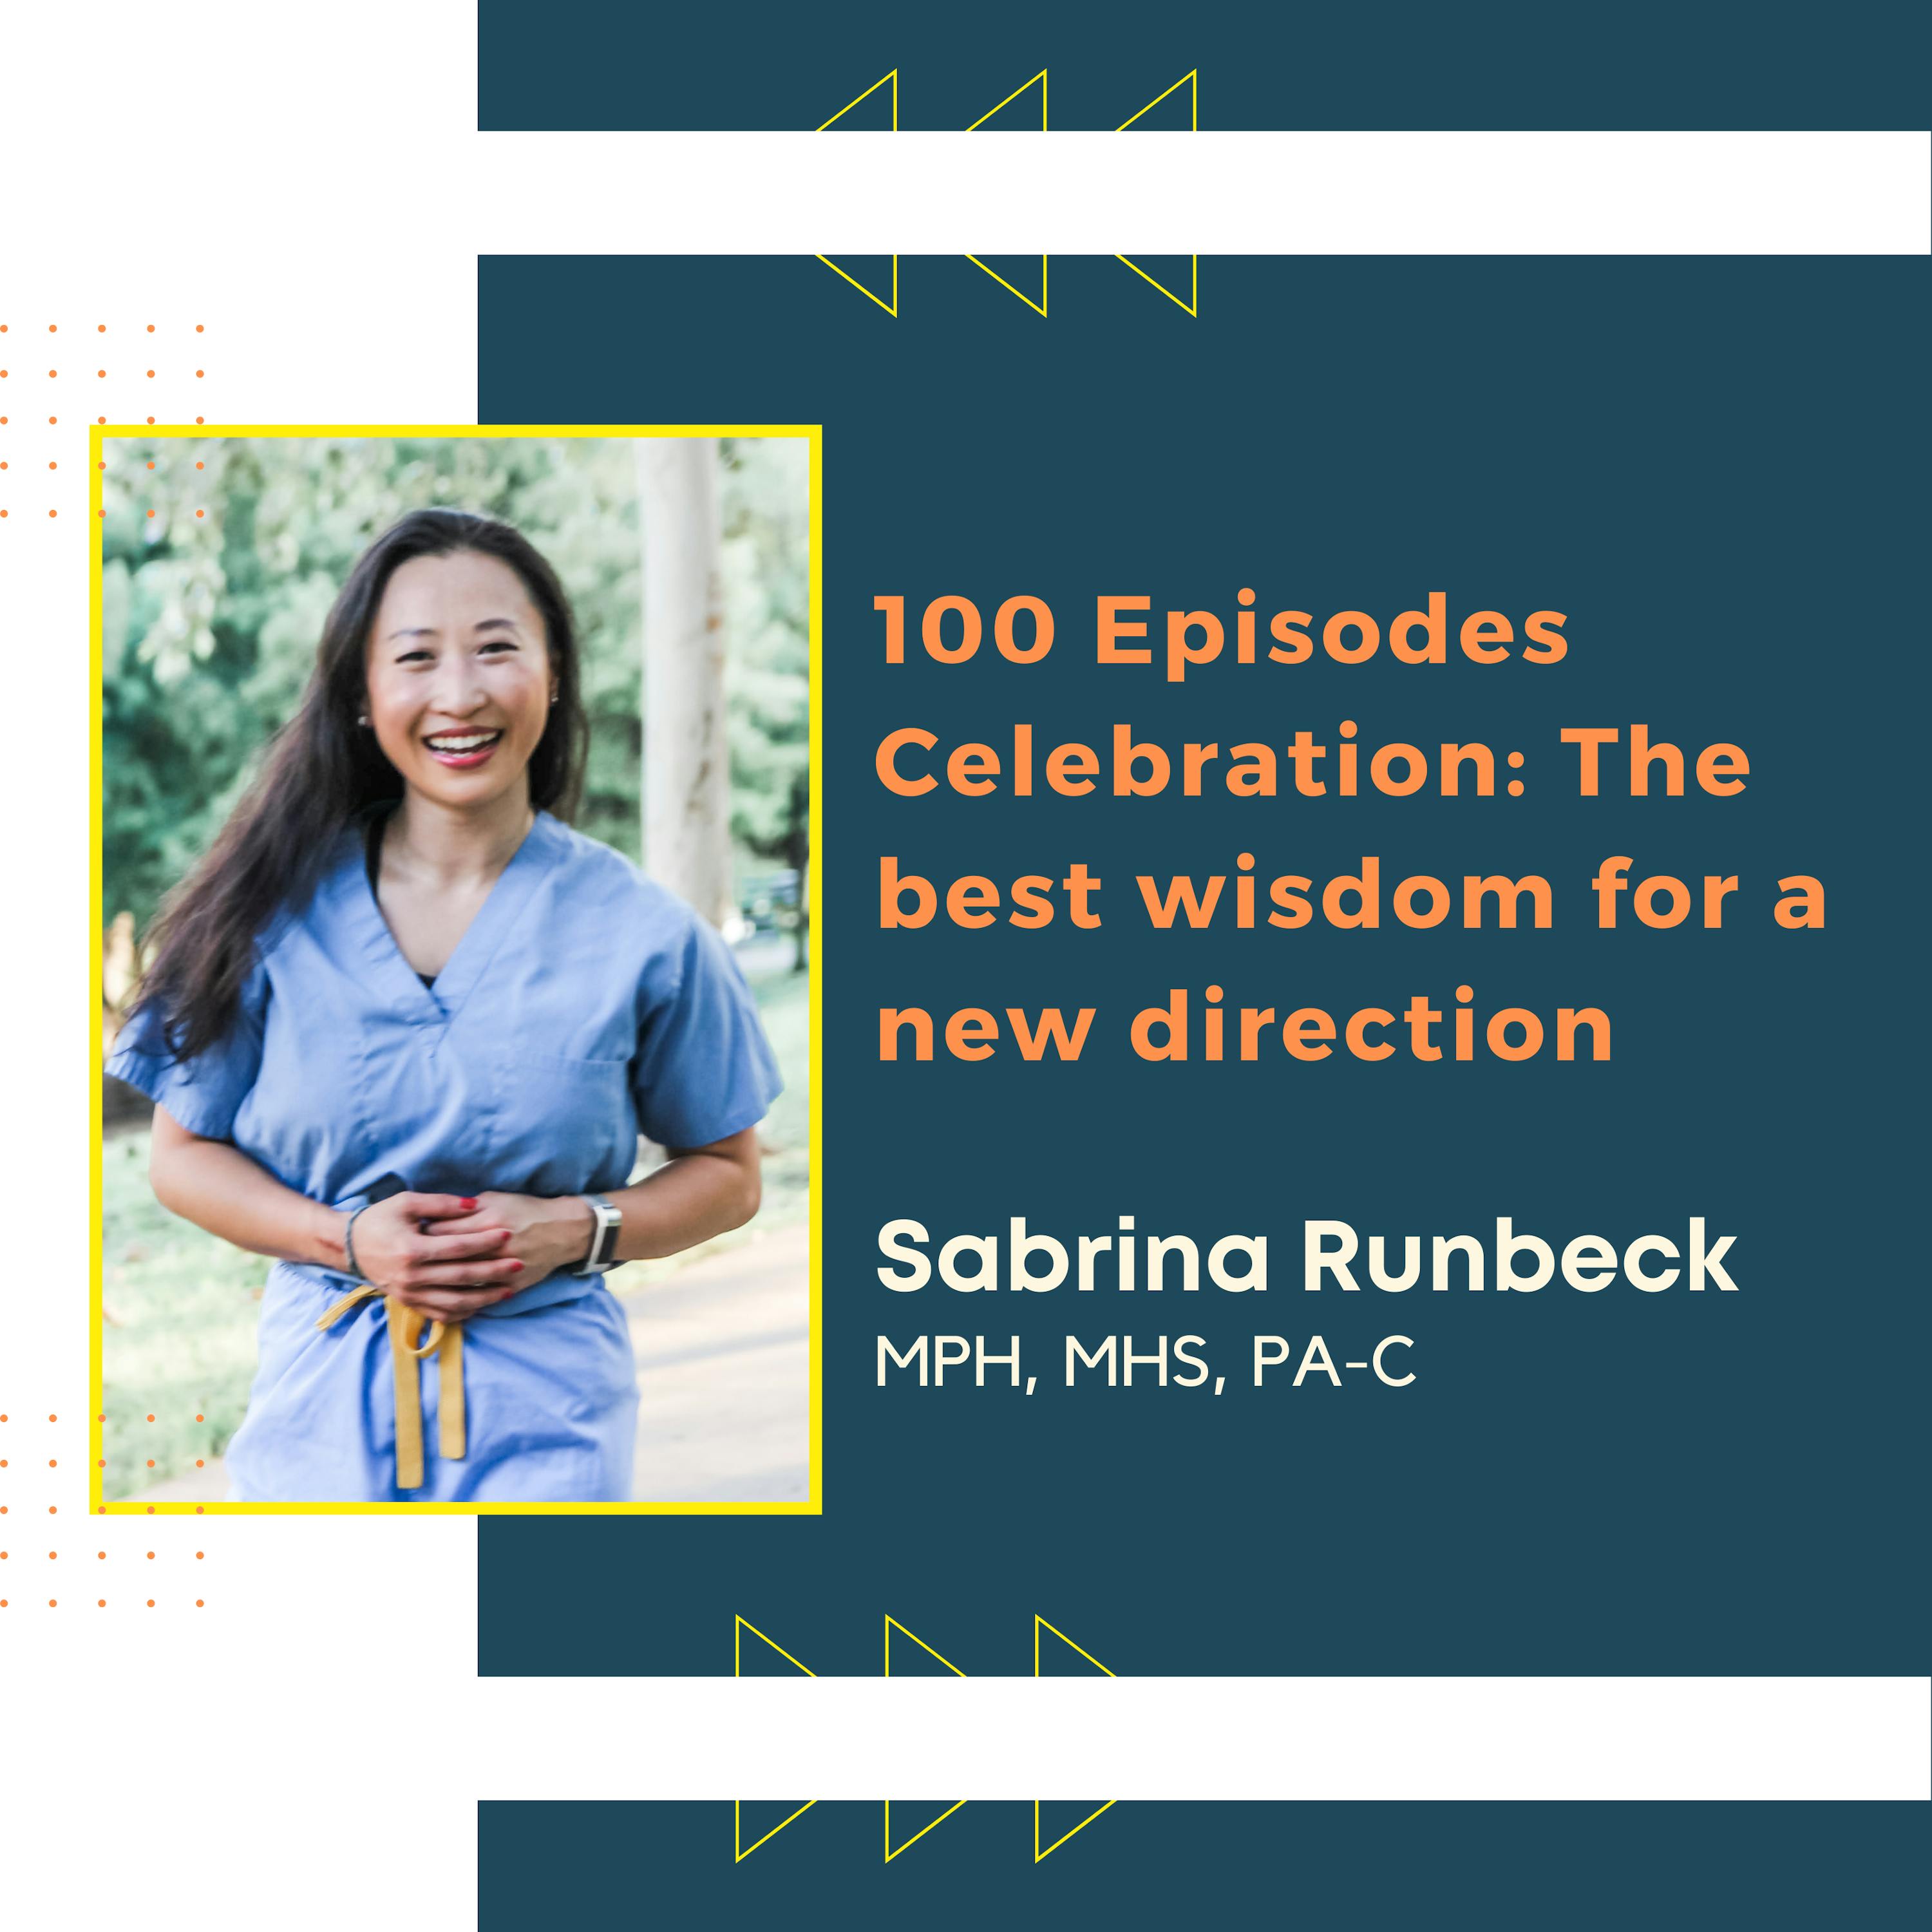 100 Episodes Celebration: The best wisdom for a new direction